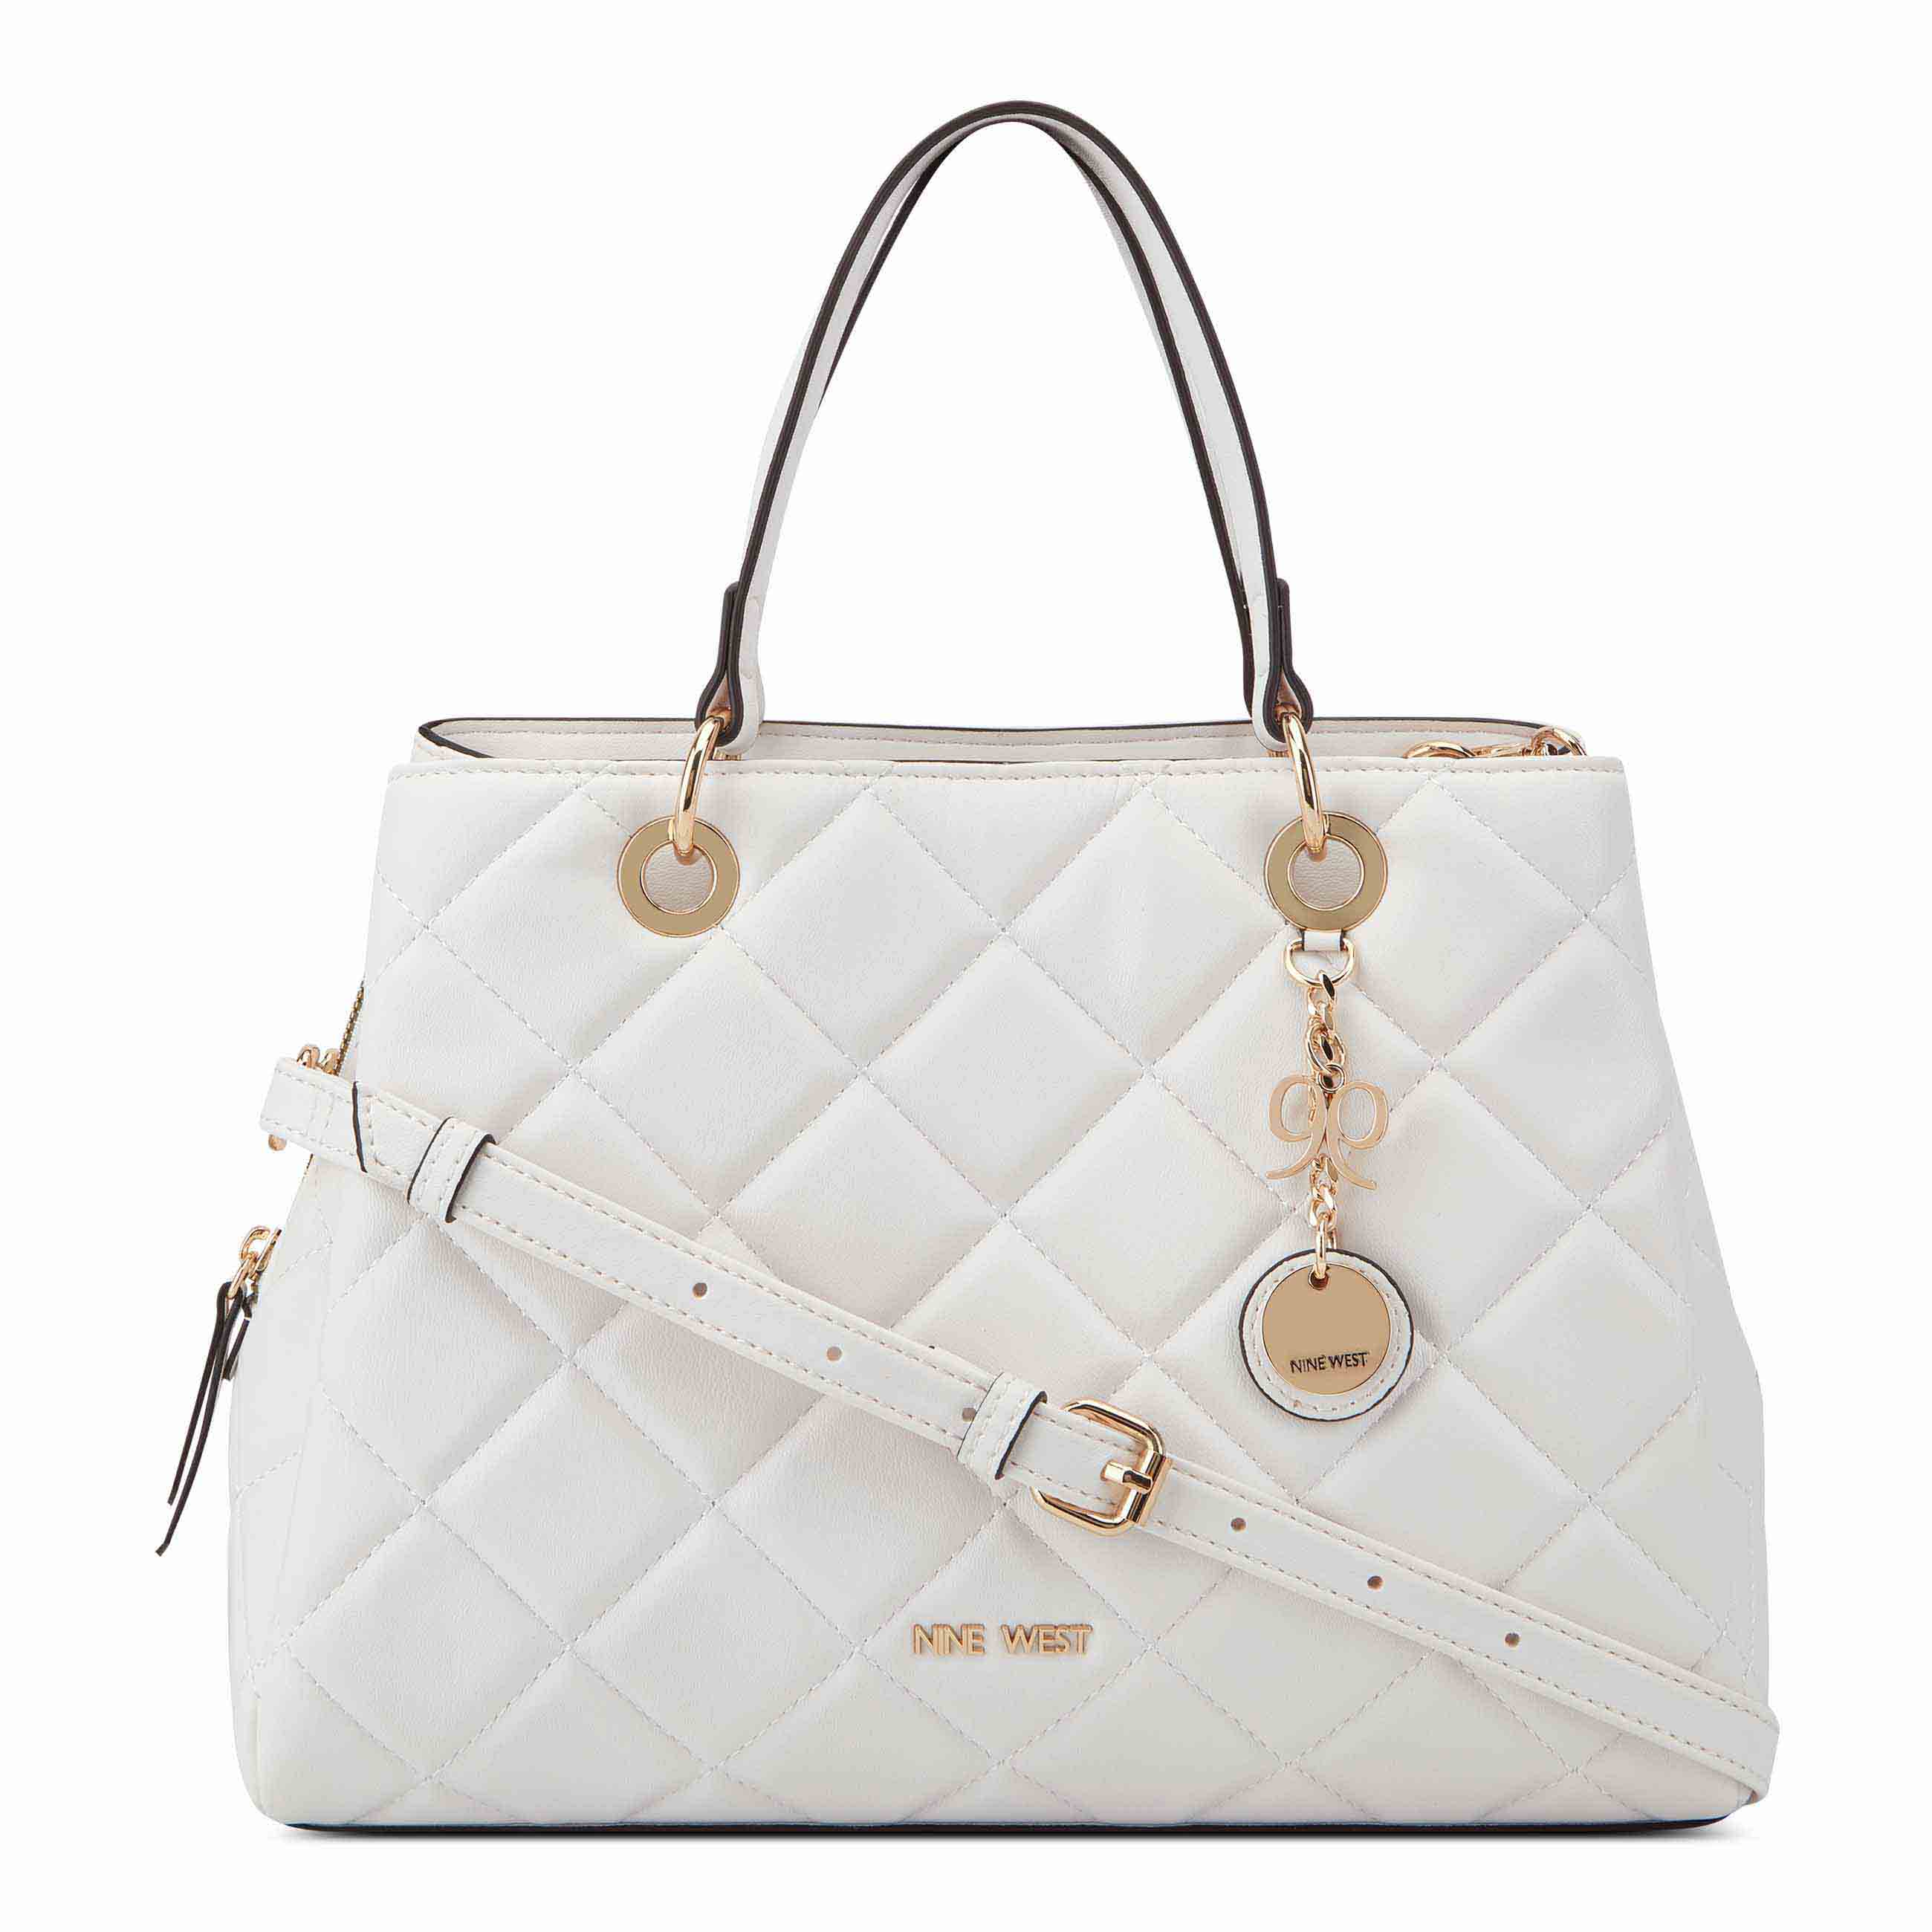 Buy Guess Handbags Online In India - Etsy India